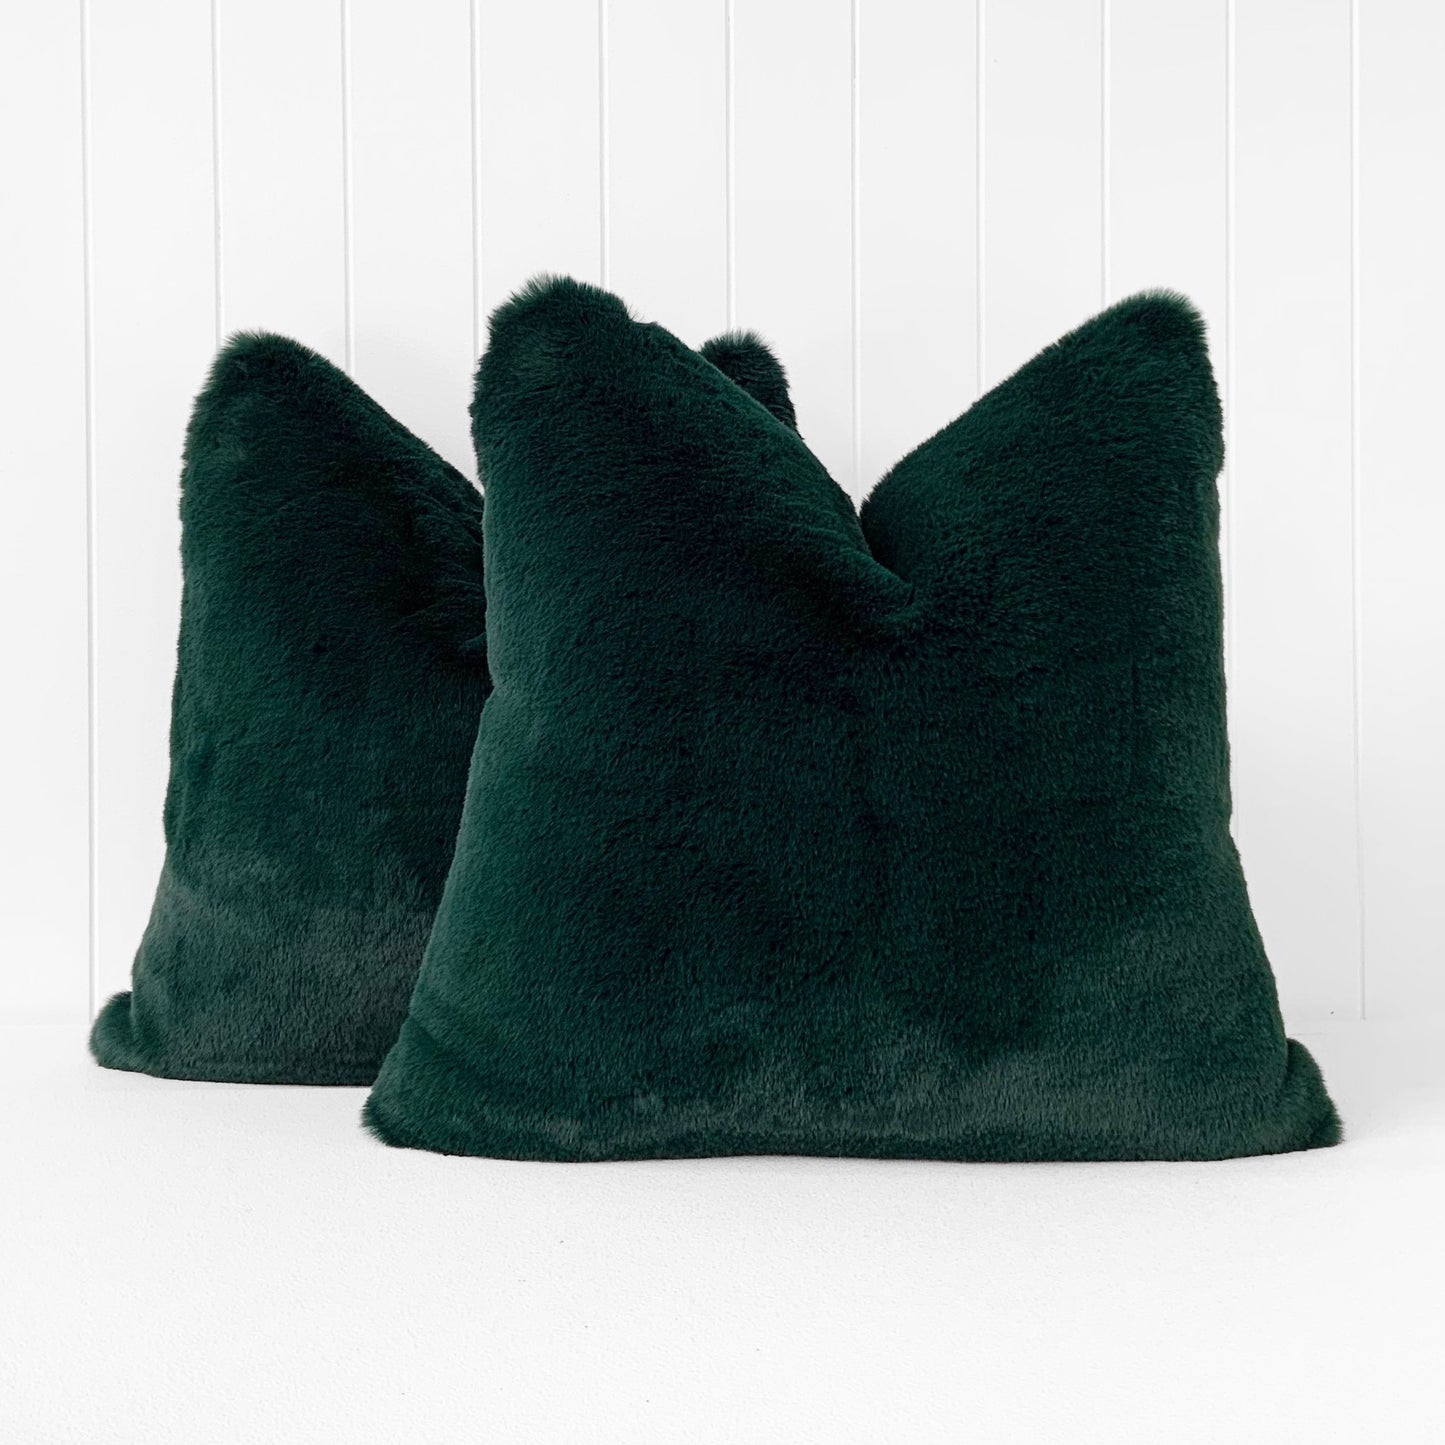 PLUSH BUNNY CUSHION | FOREST GREEN | 55CM X 55CM | CHOOSE FEATHER OR FIBRE FILLING